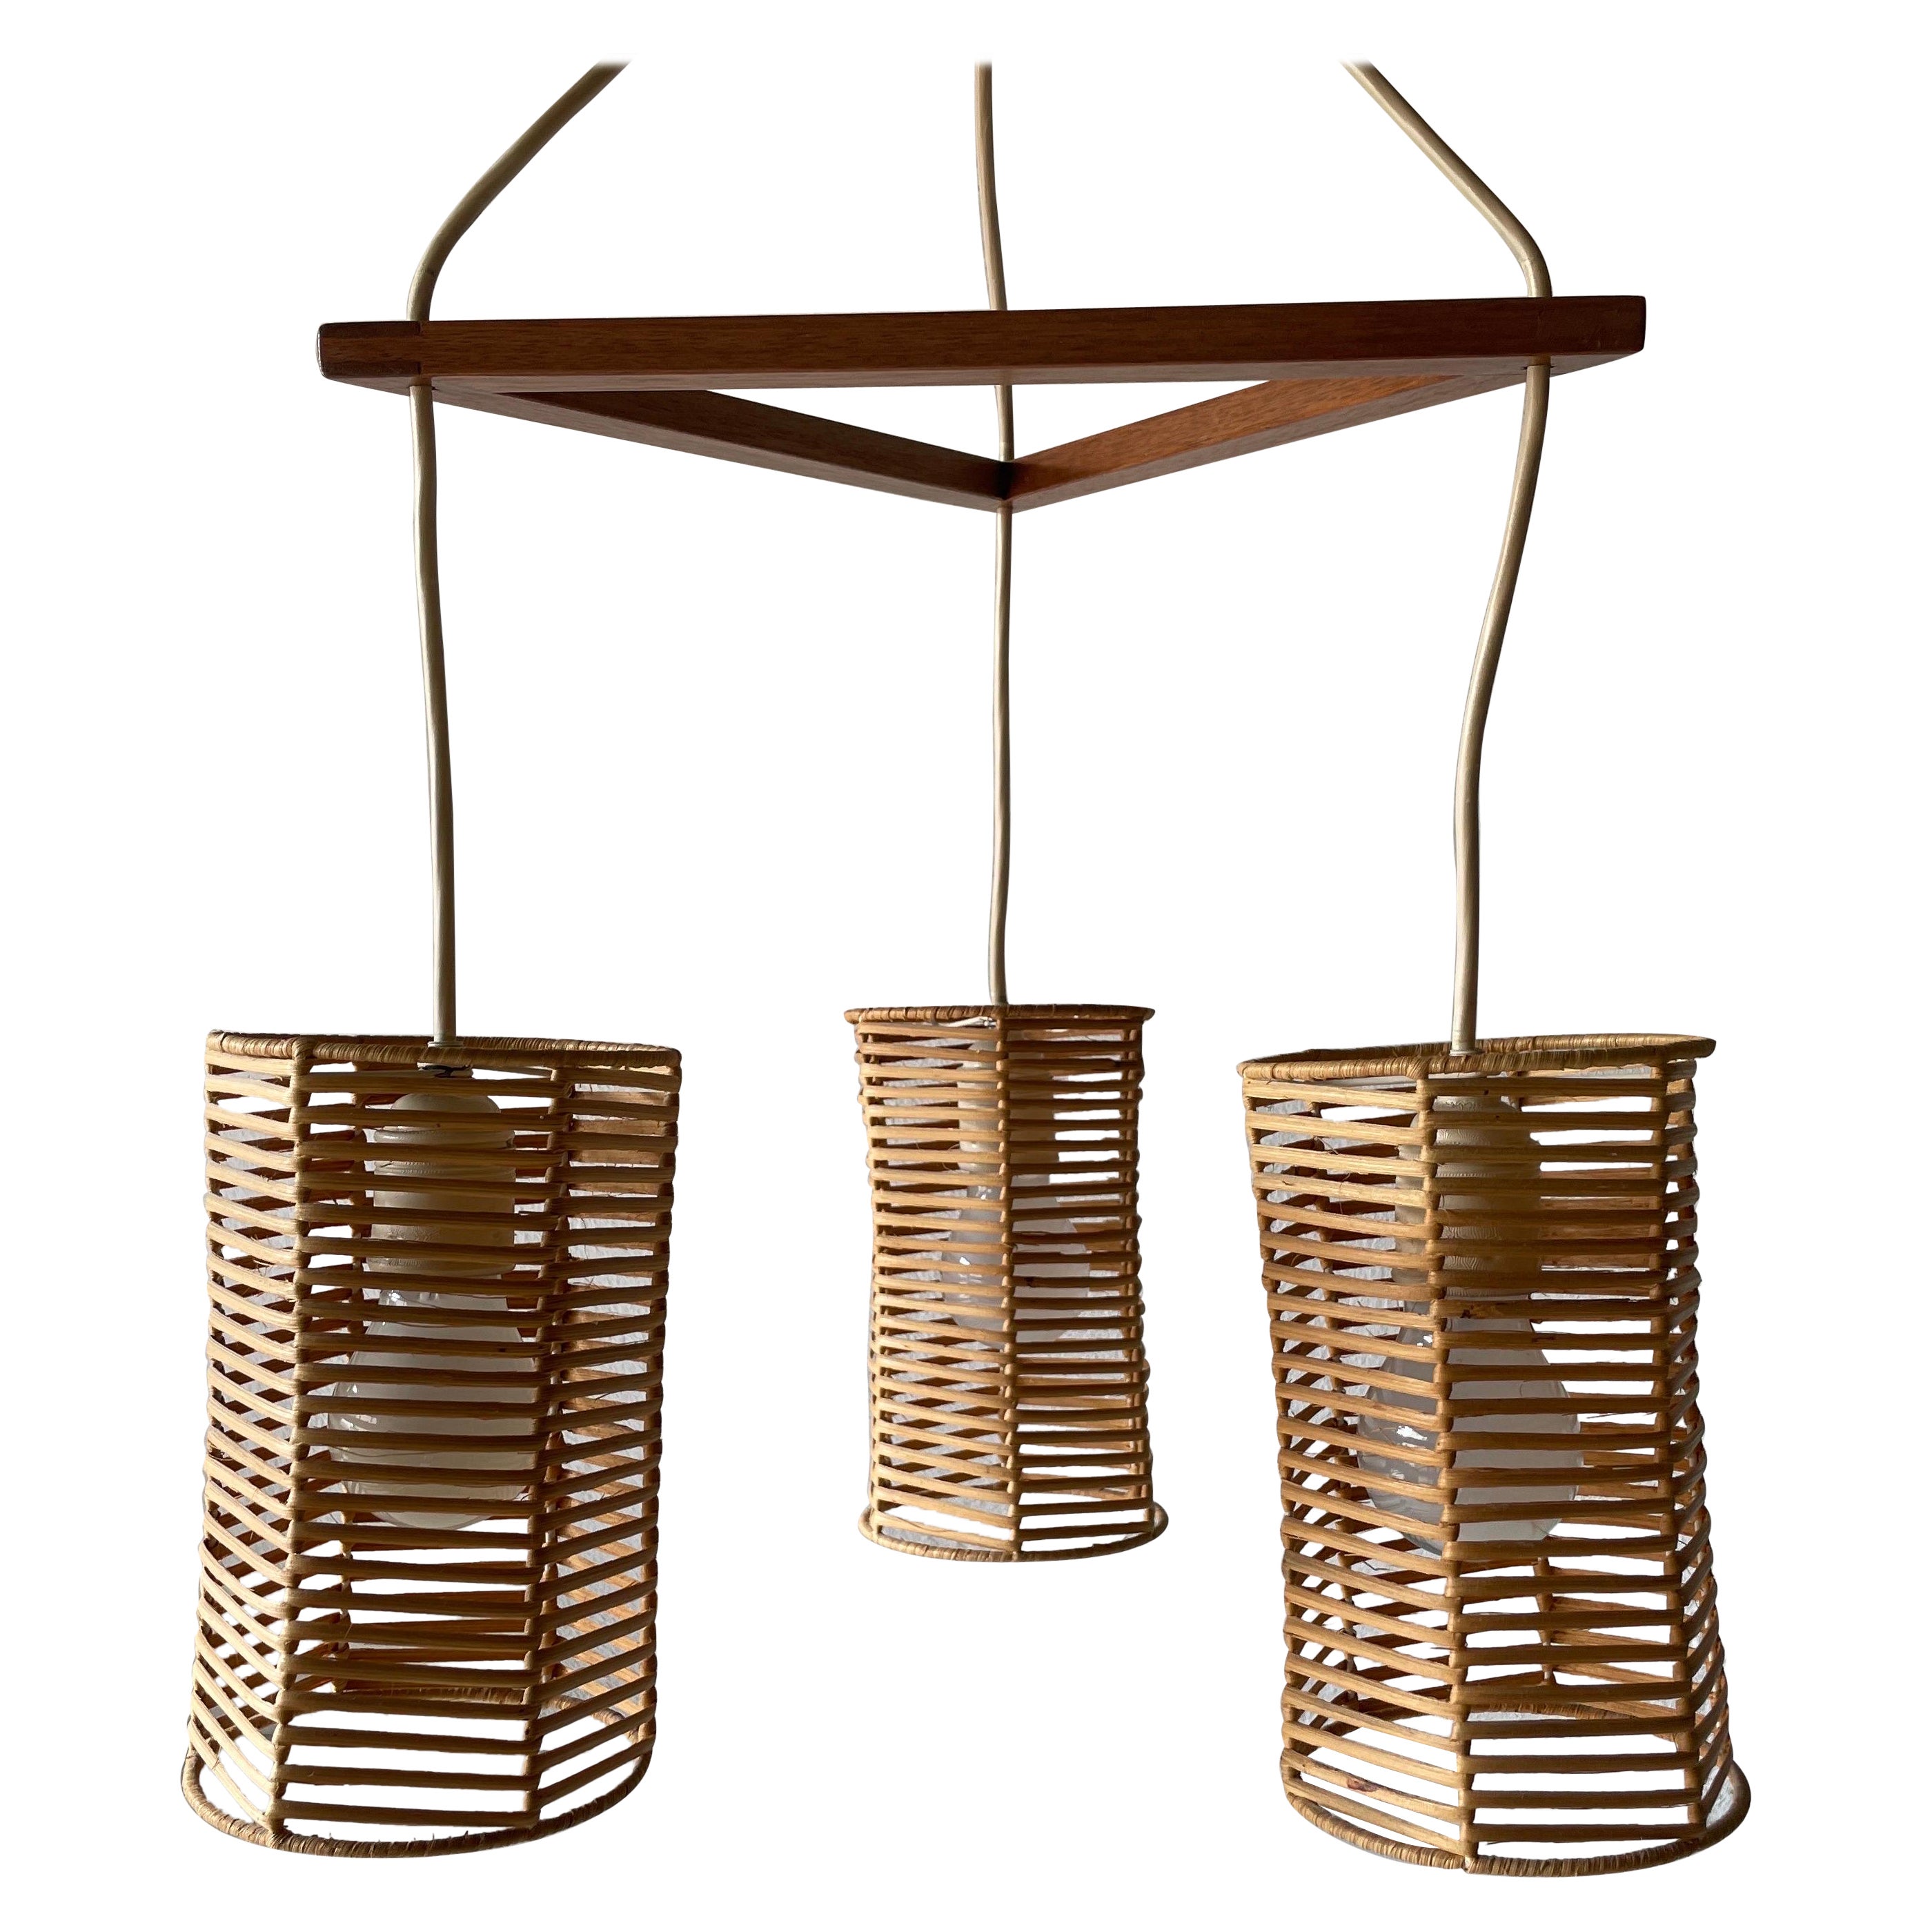 Triple Shade Wicker and Wood Pendant Lamp, 1960s, Germany